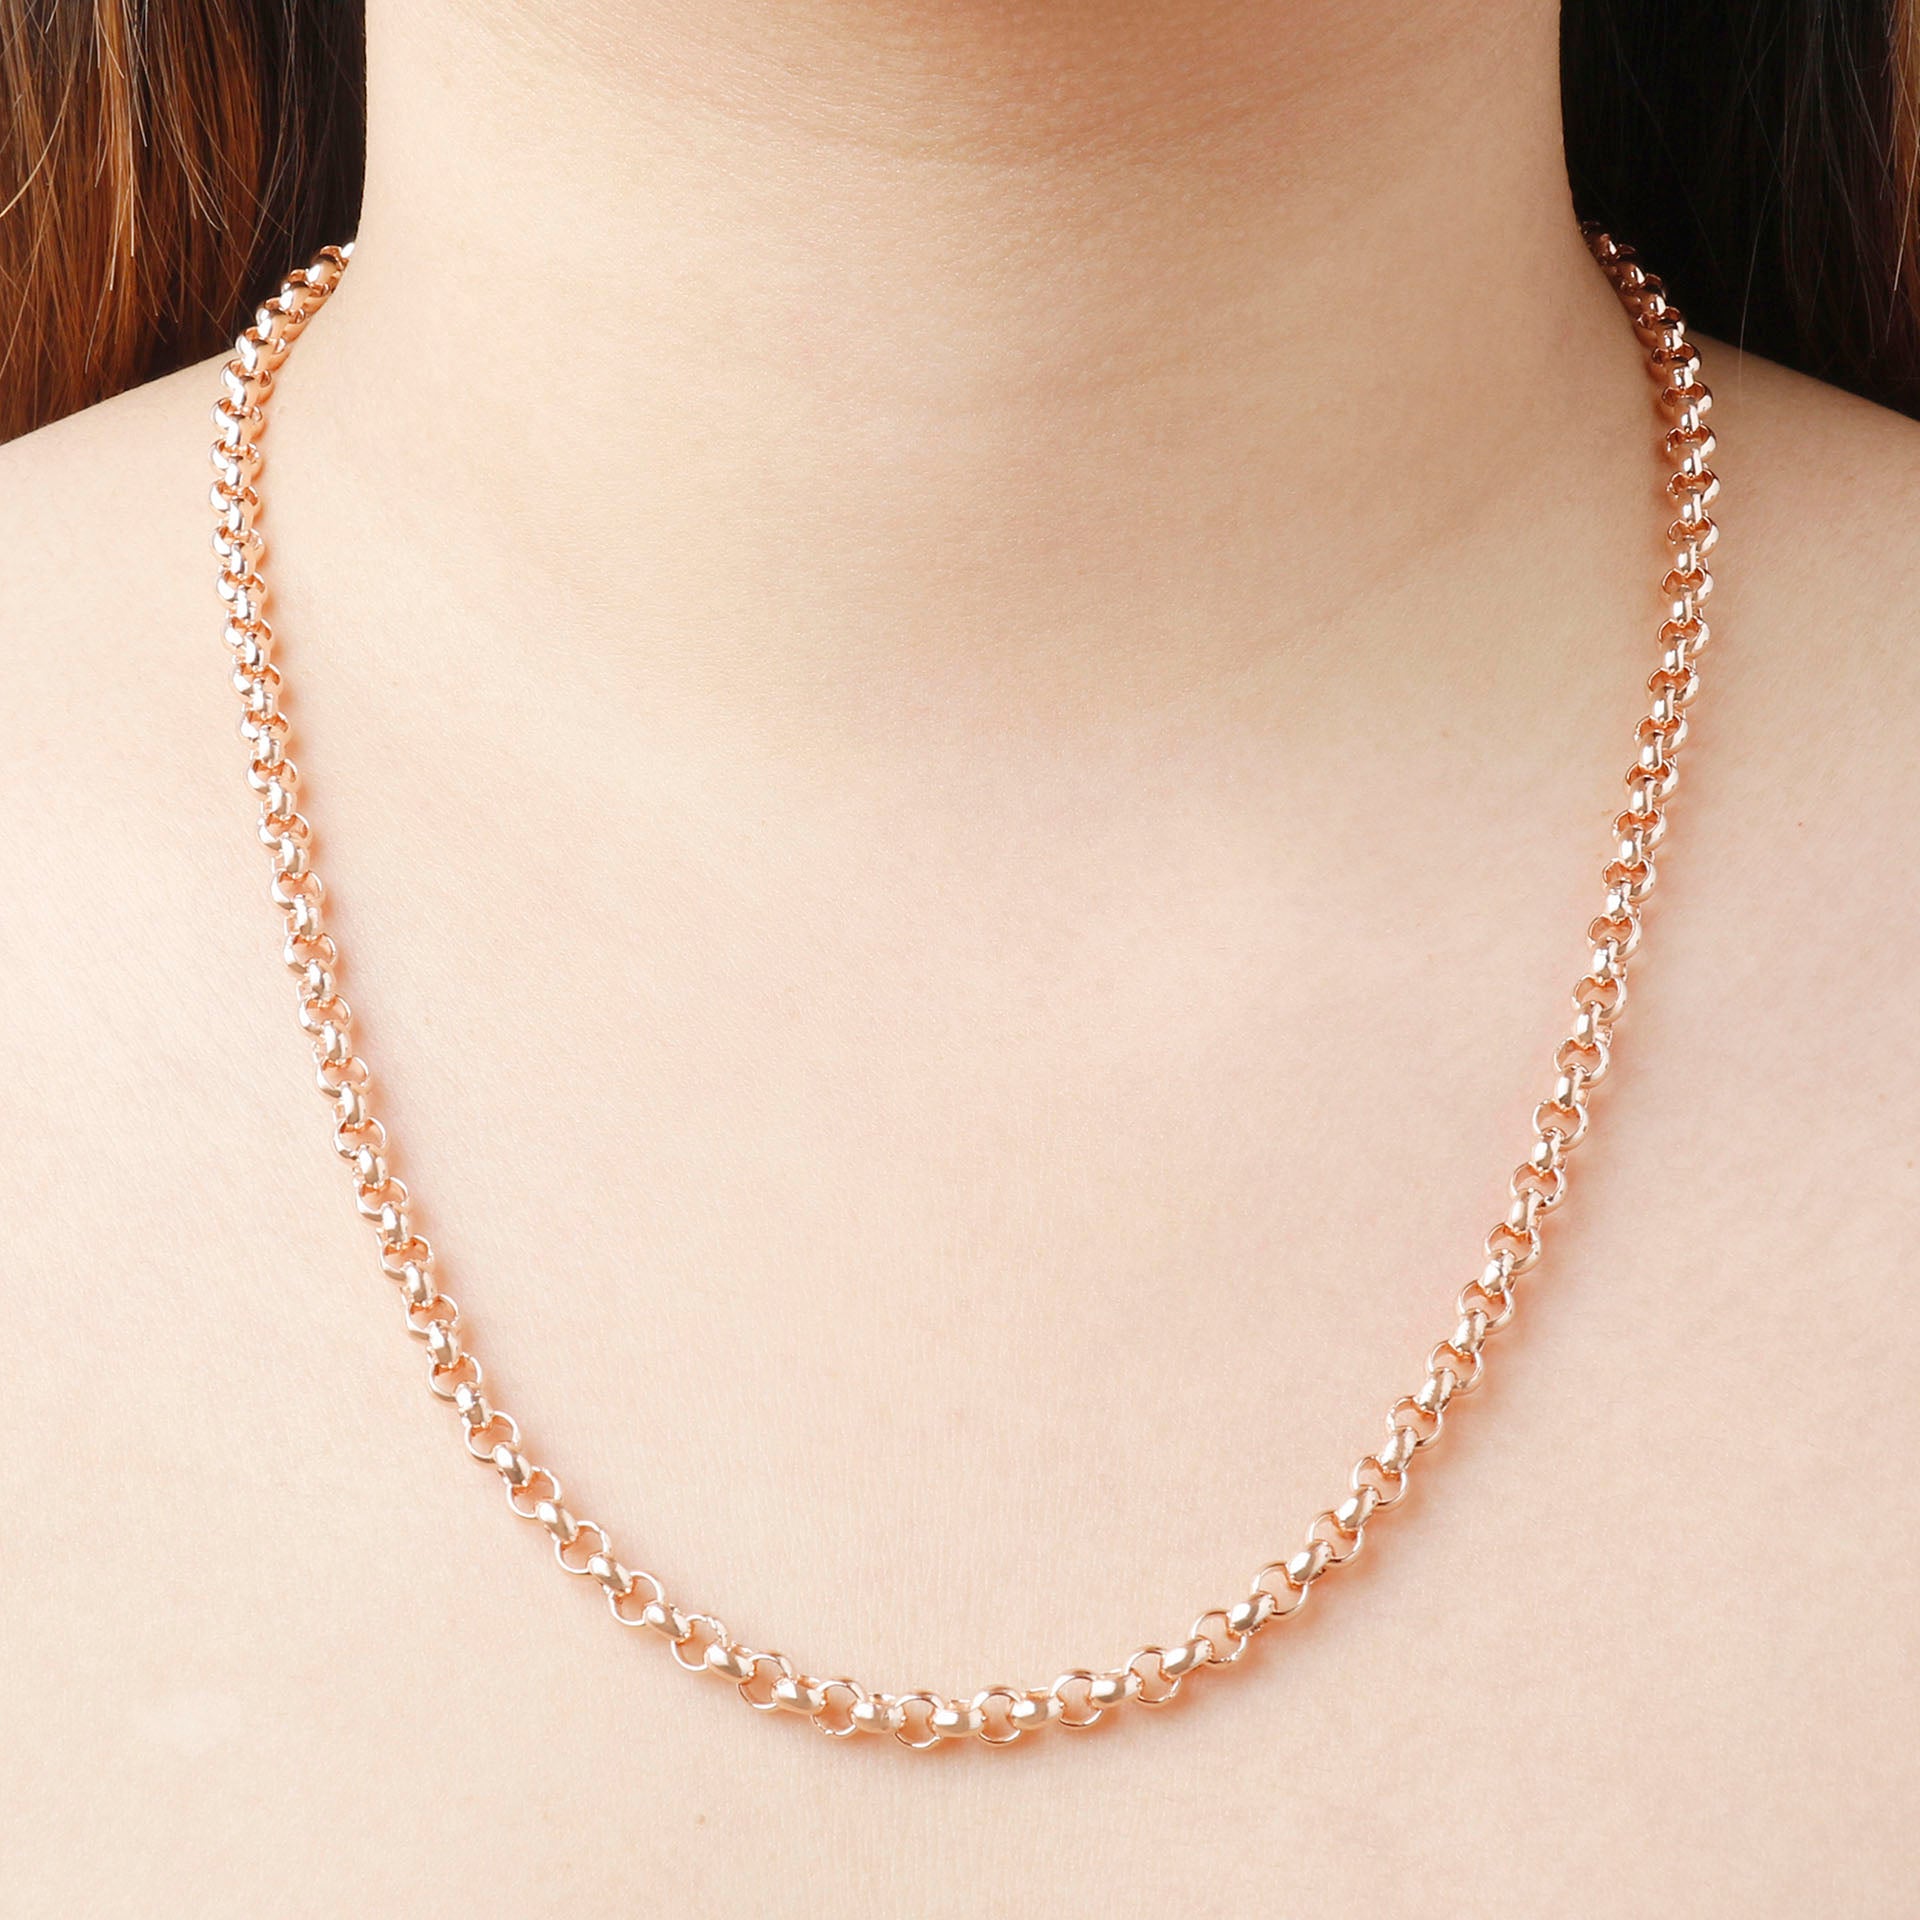 Bellissimo Bronzo Italian 20″ Rose Gold Rolo Link Necklace